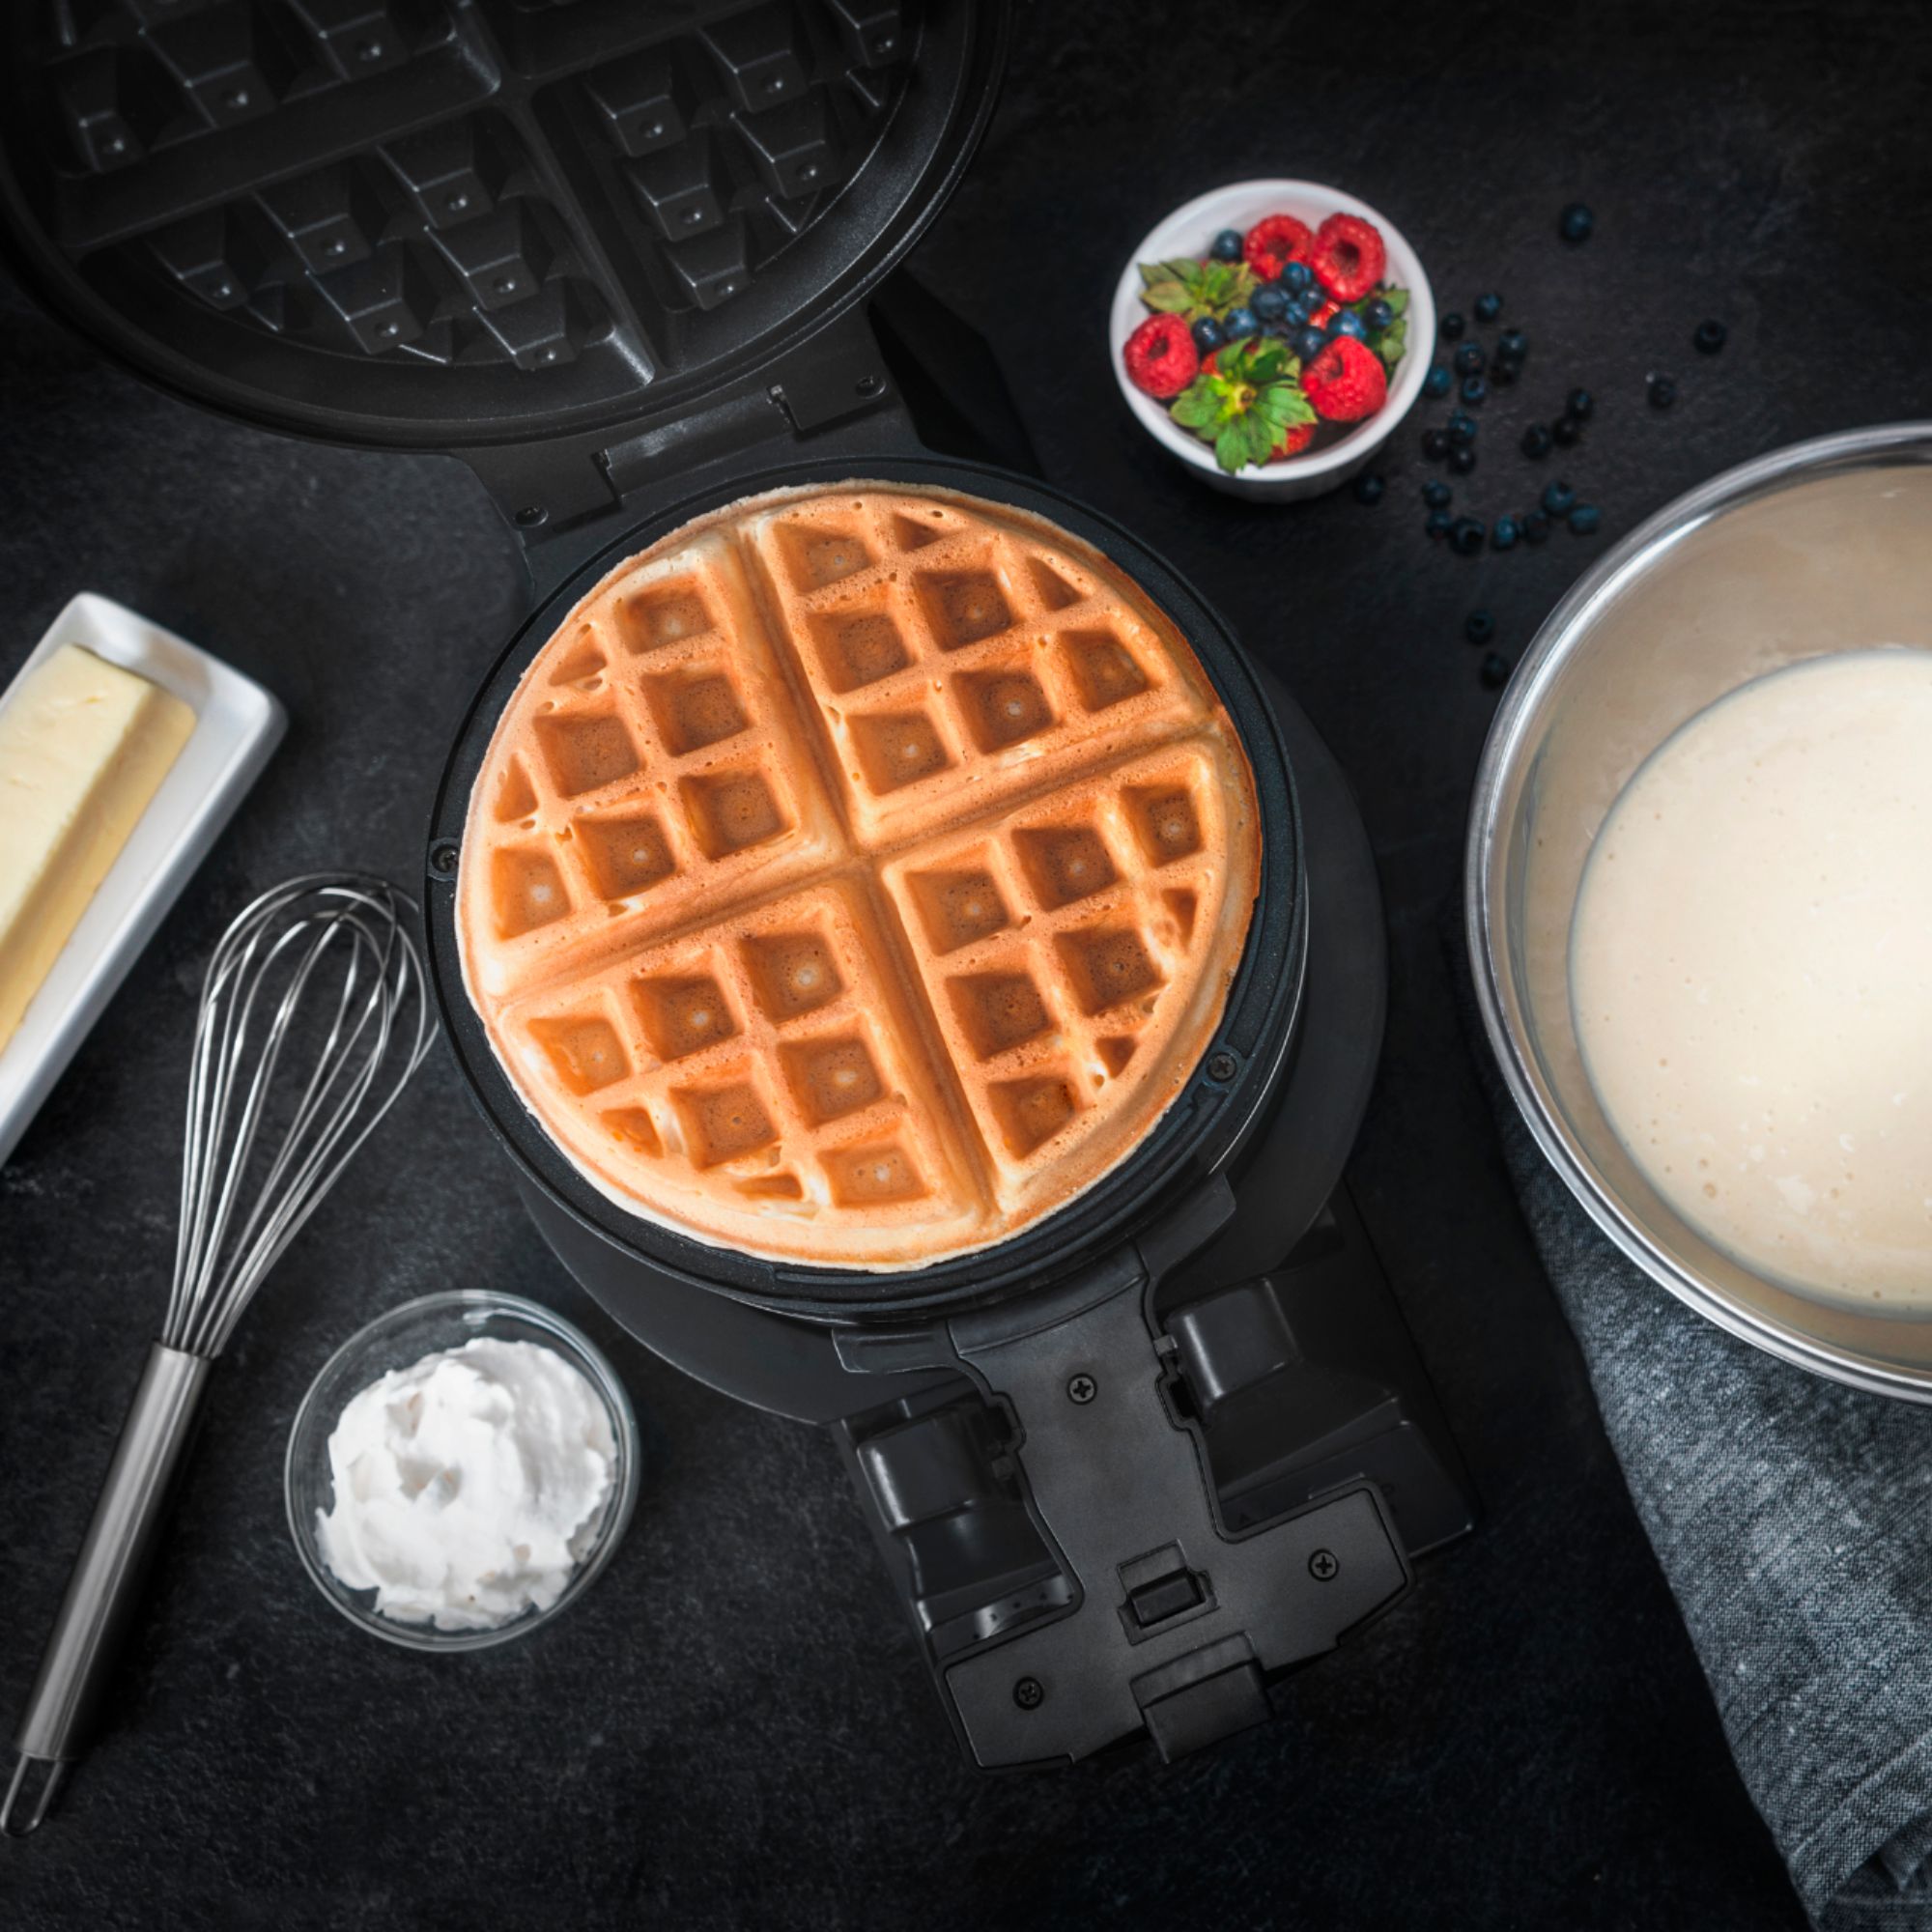 New In Box Bella Rotating Belgian Waffle Maker - Makes 1 Inch Thick Belgian  Waffles #1642599